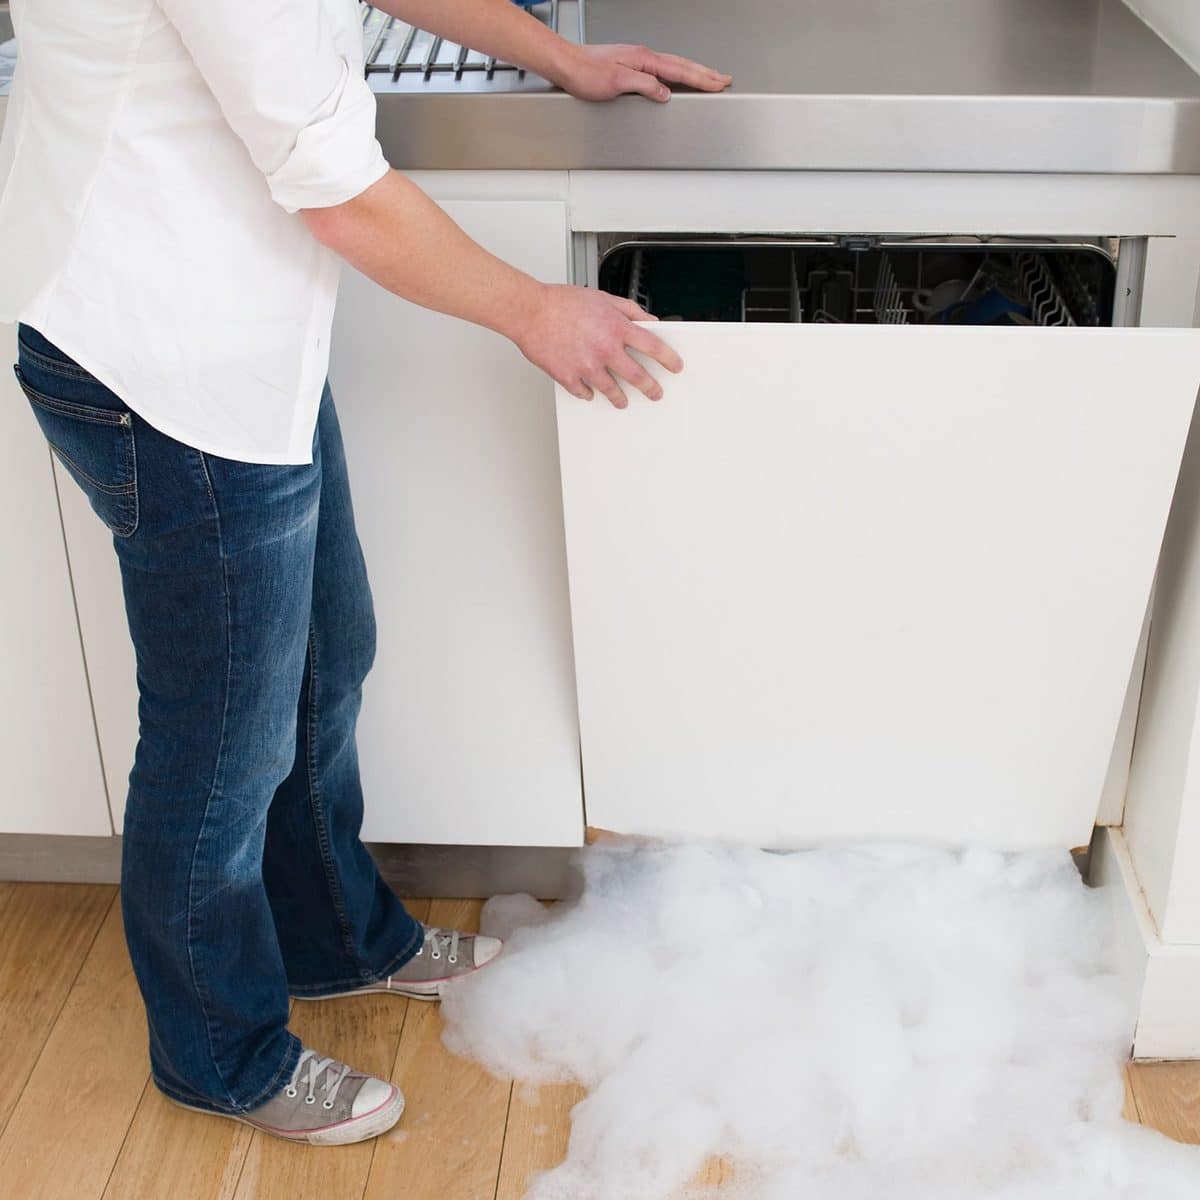 Woman opening a leaking dishwasher